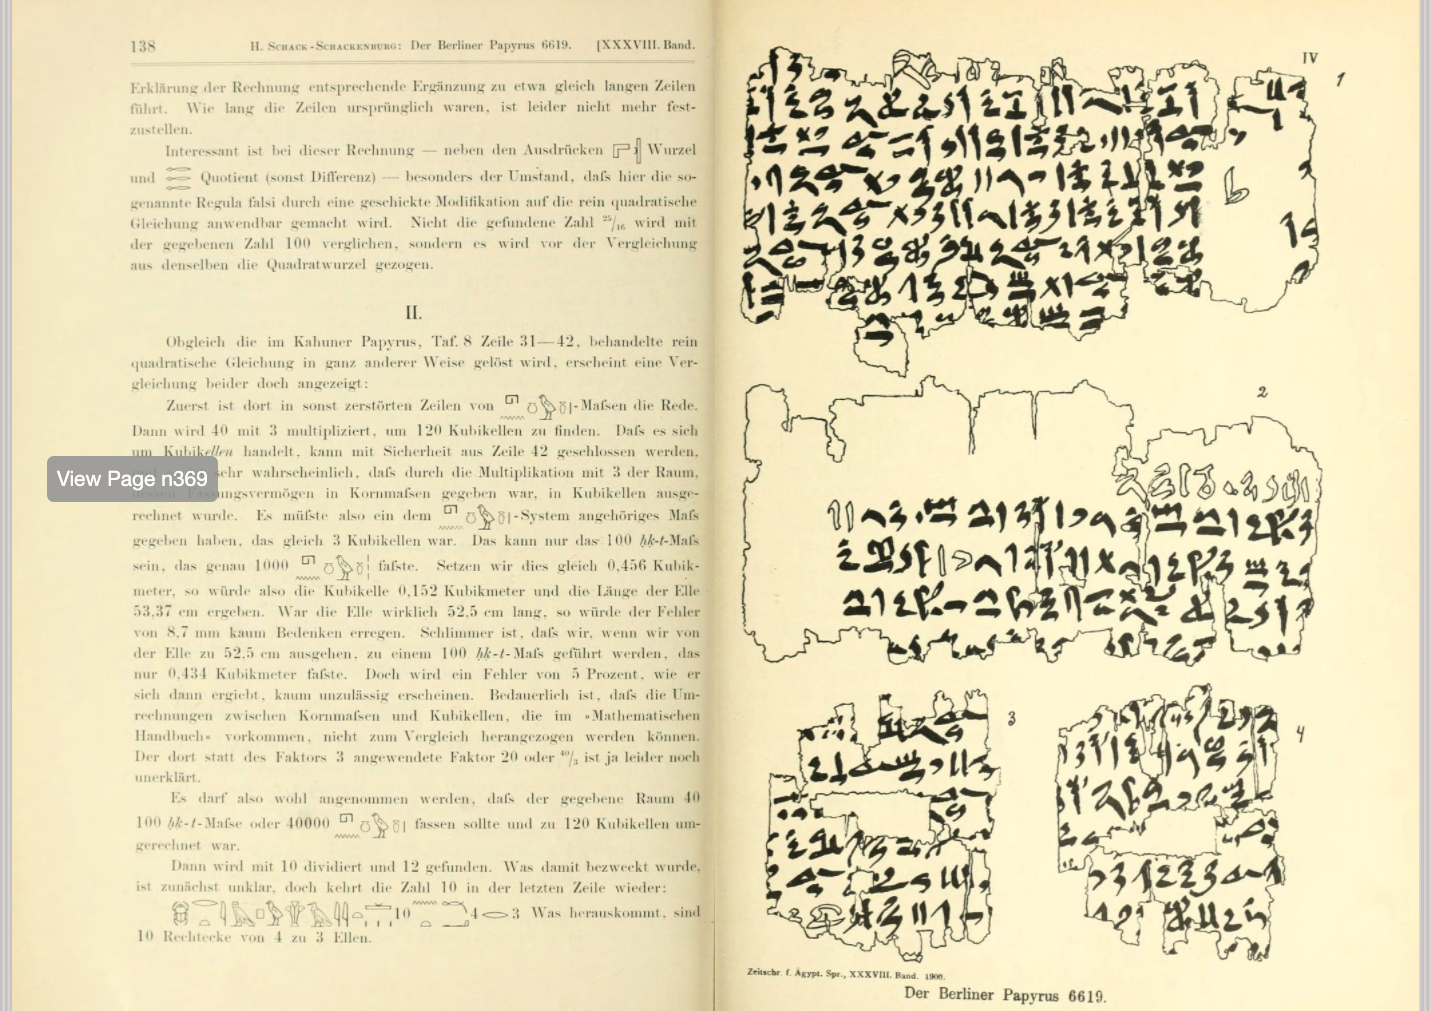 Drawing of the Berlin Papyrus 6619